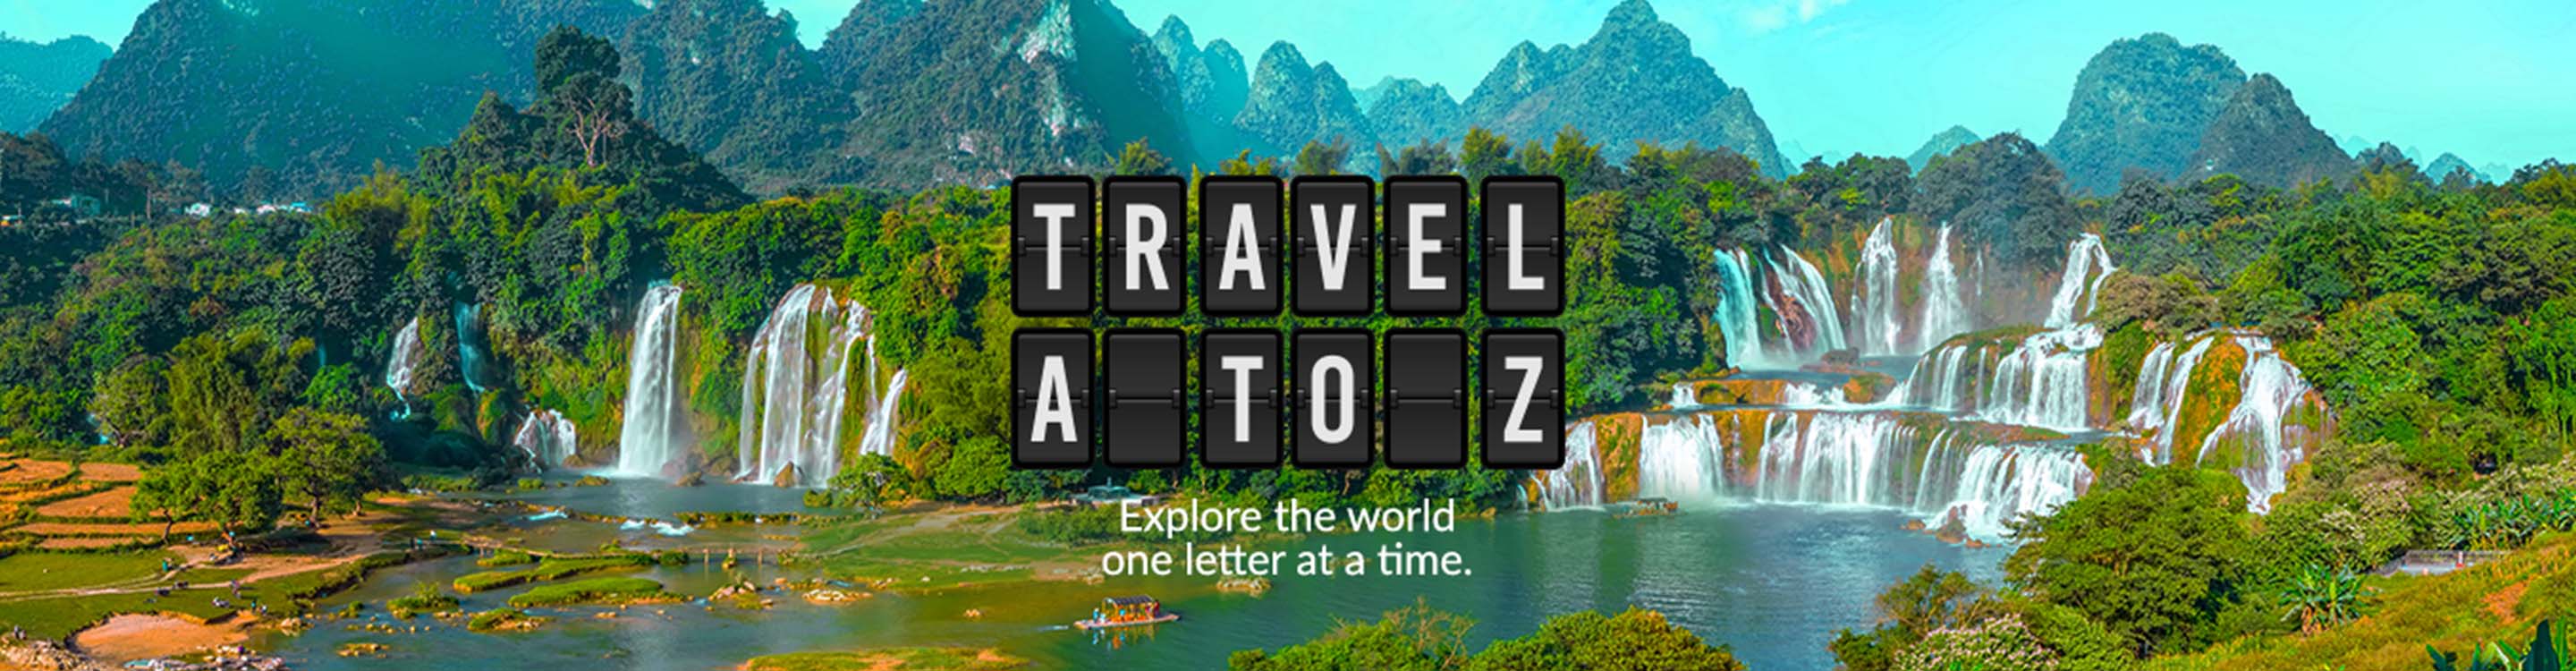 Travel A to Z. Explore the world one letter at a time. 